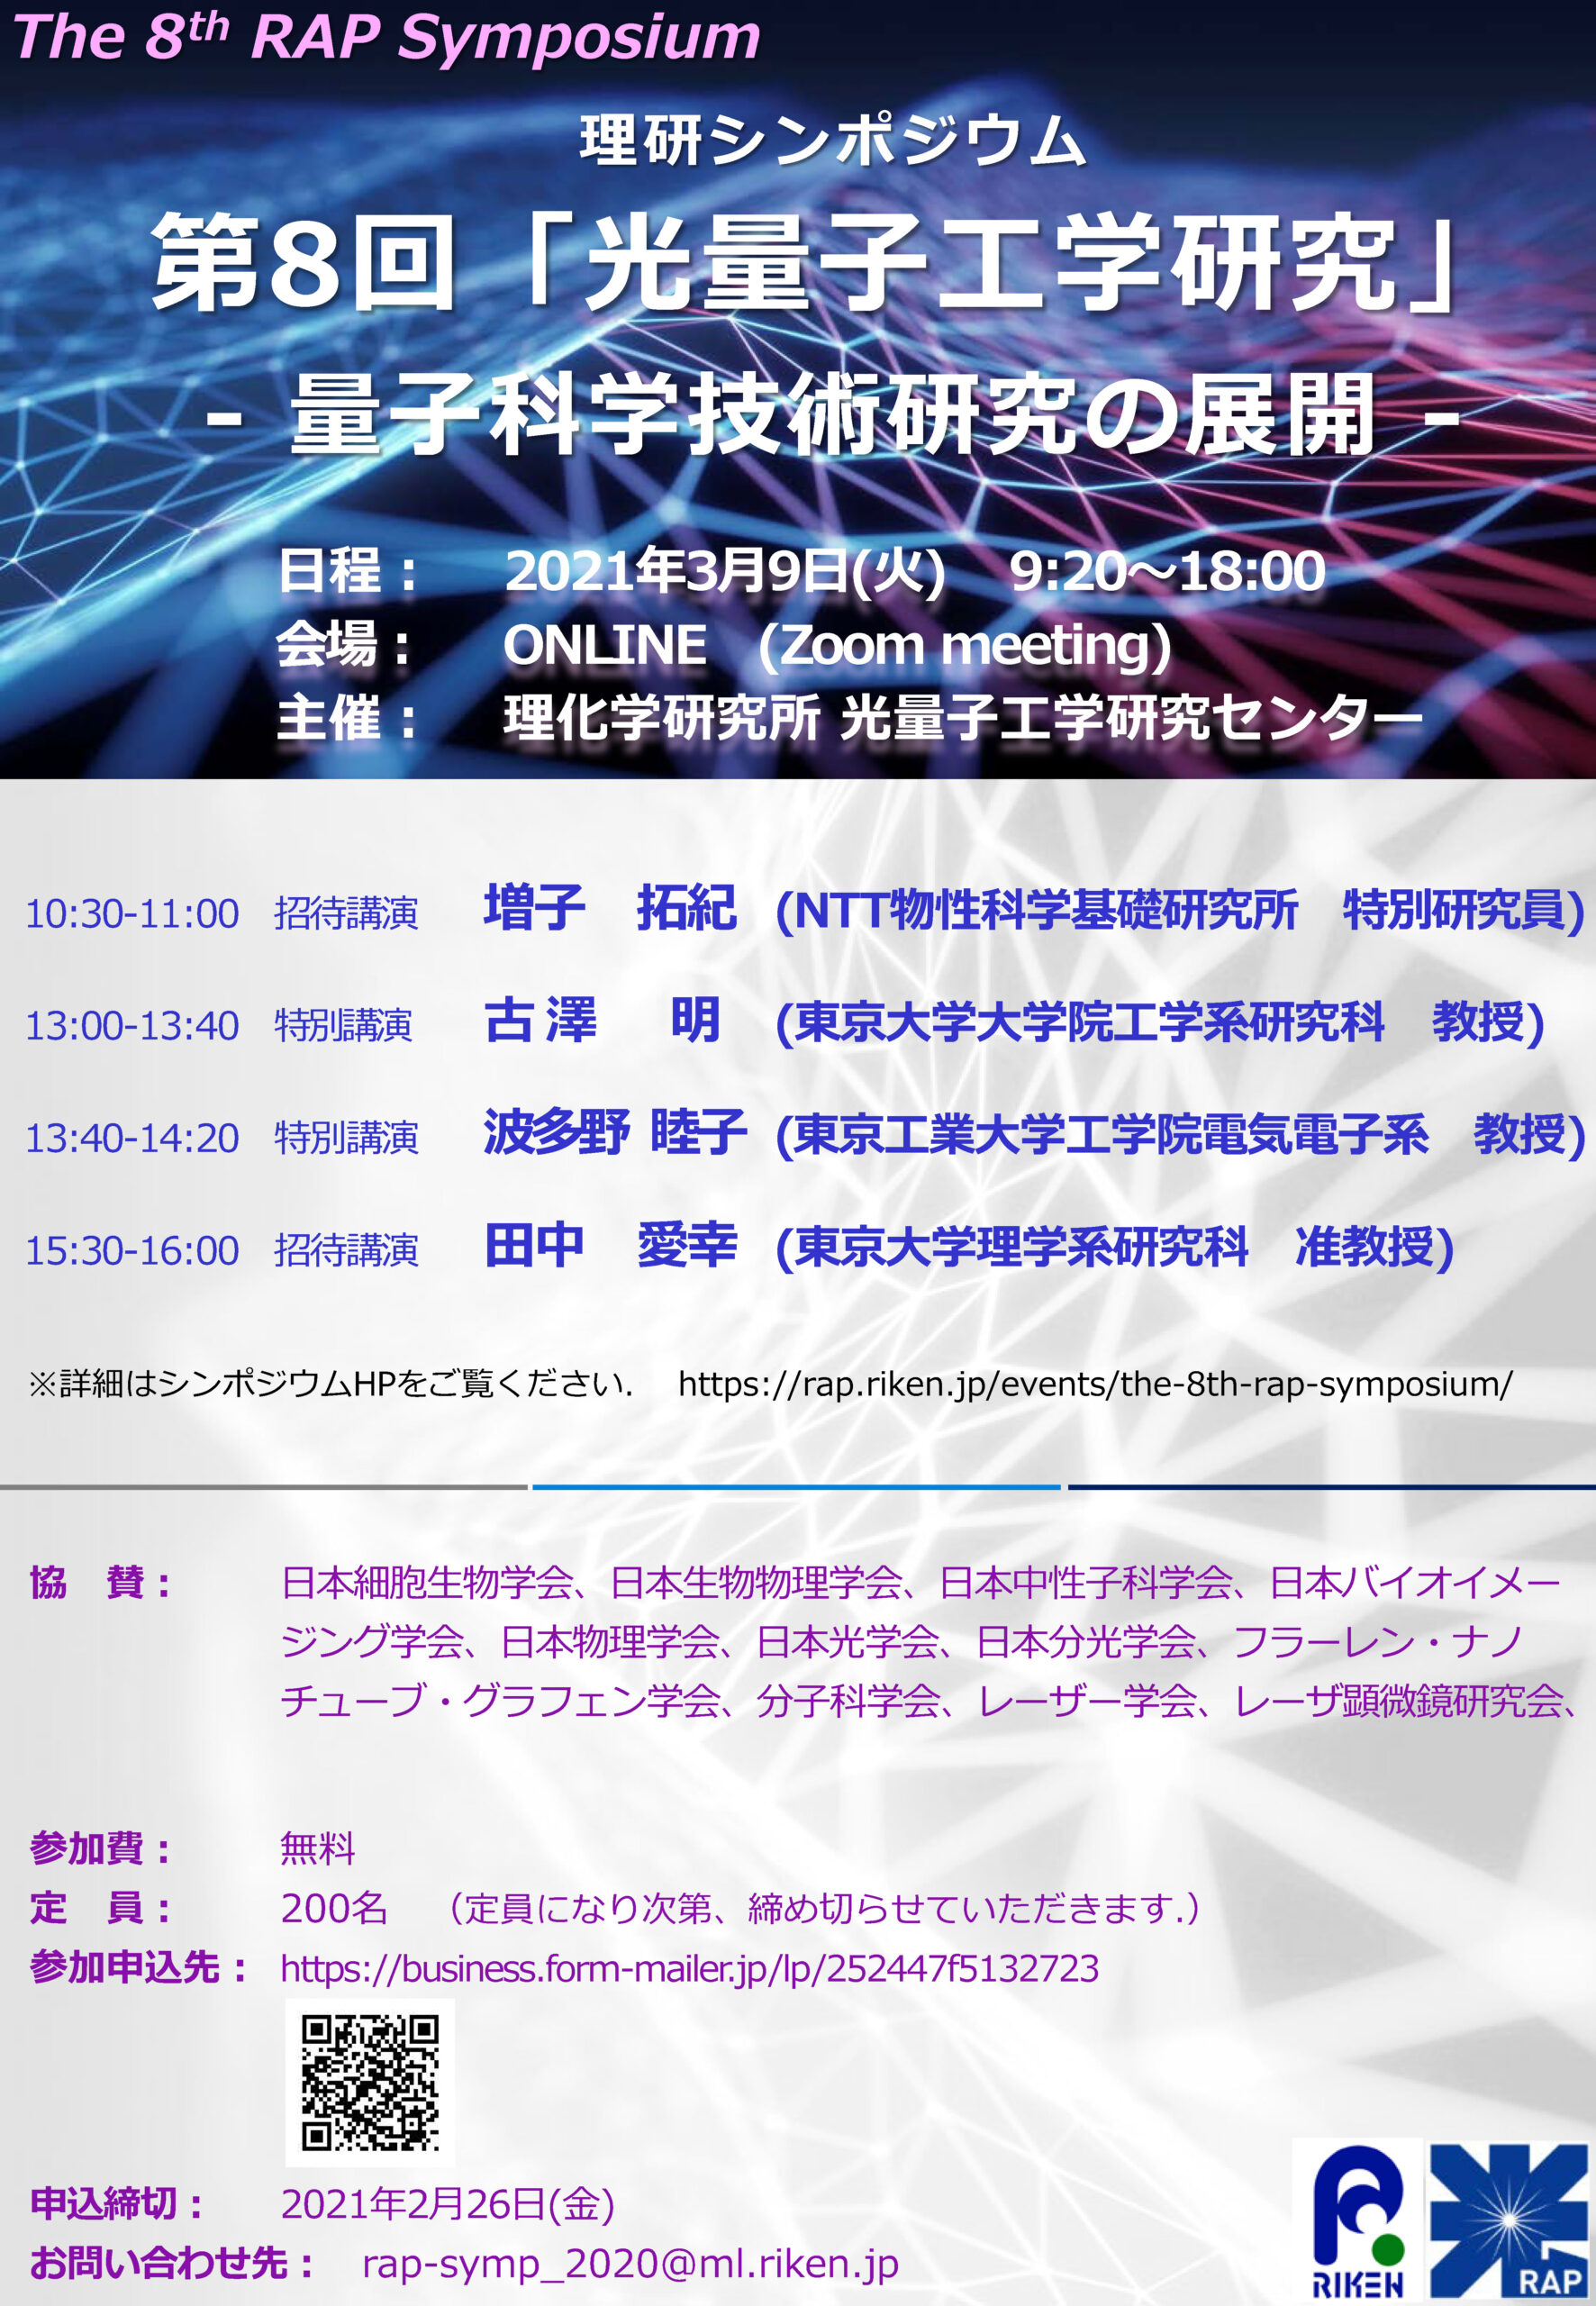 Poster of the 8th RAP Symposium